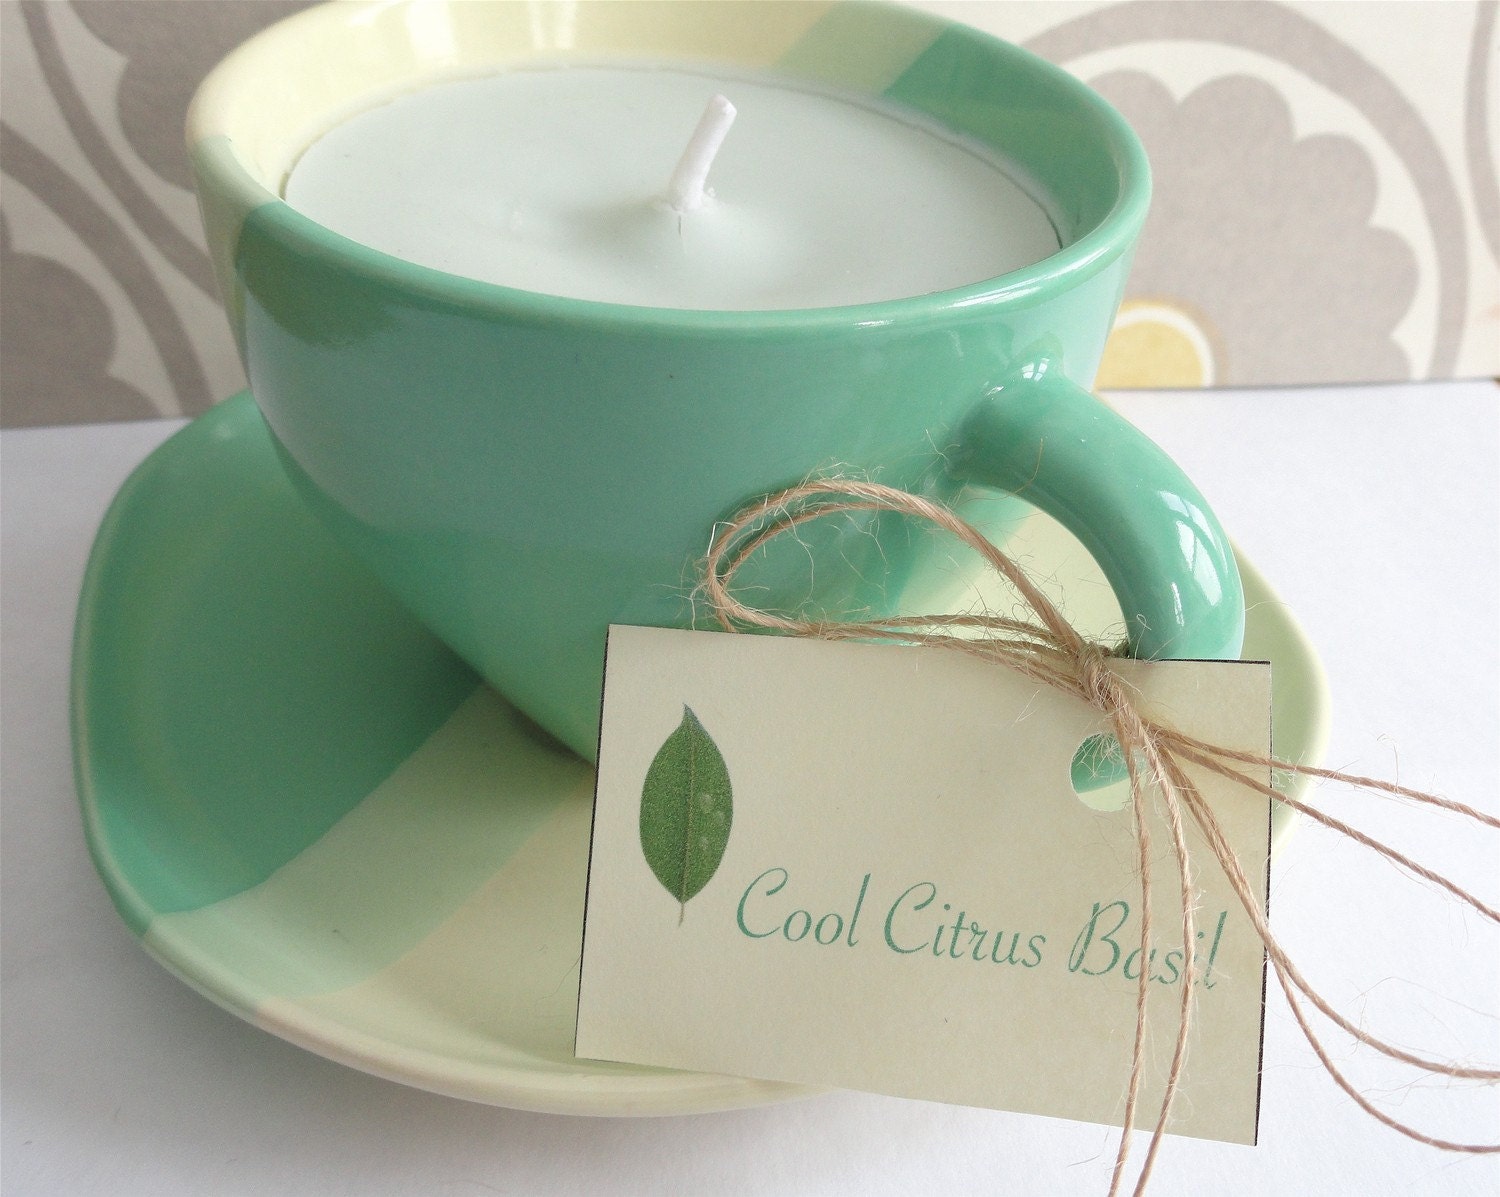 COOL CITRUS BASIL Handcrafted Soy Teacup Candle (7 oz.)